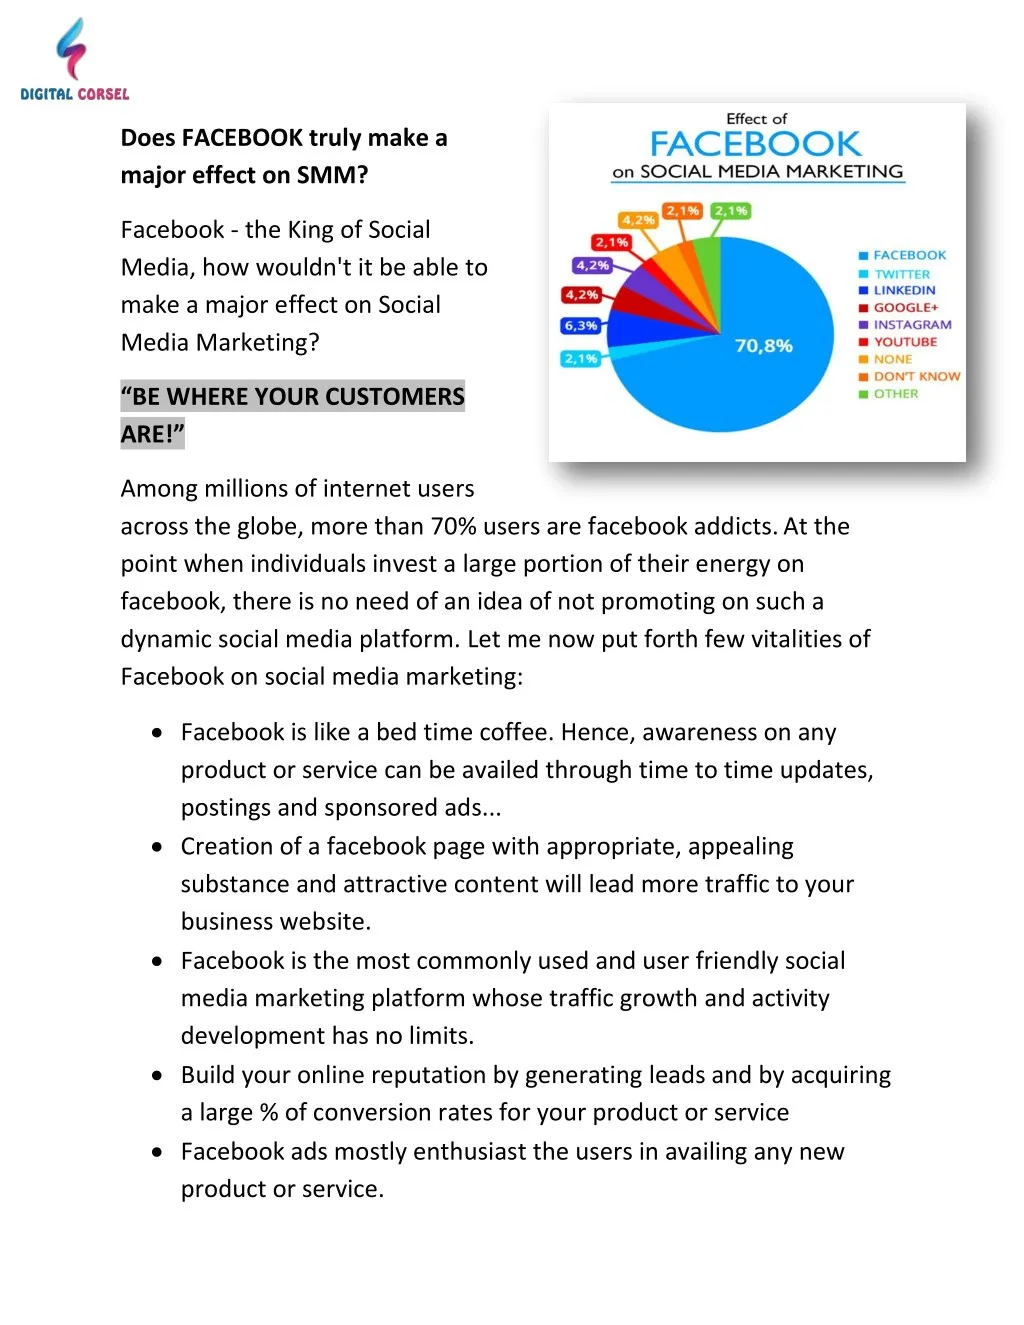 does facebook truly make a major effect on smm